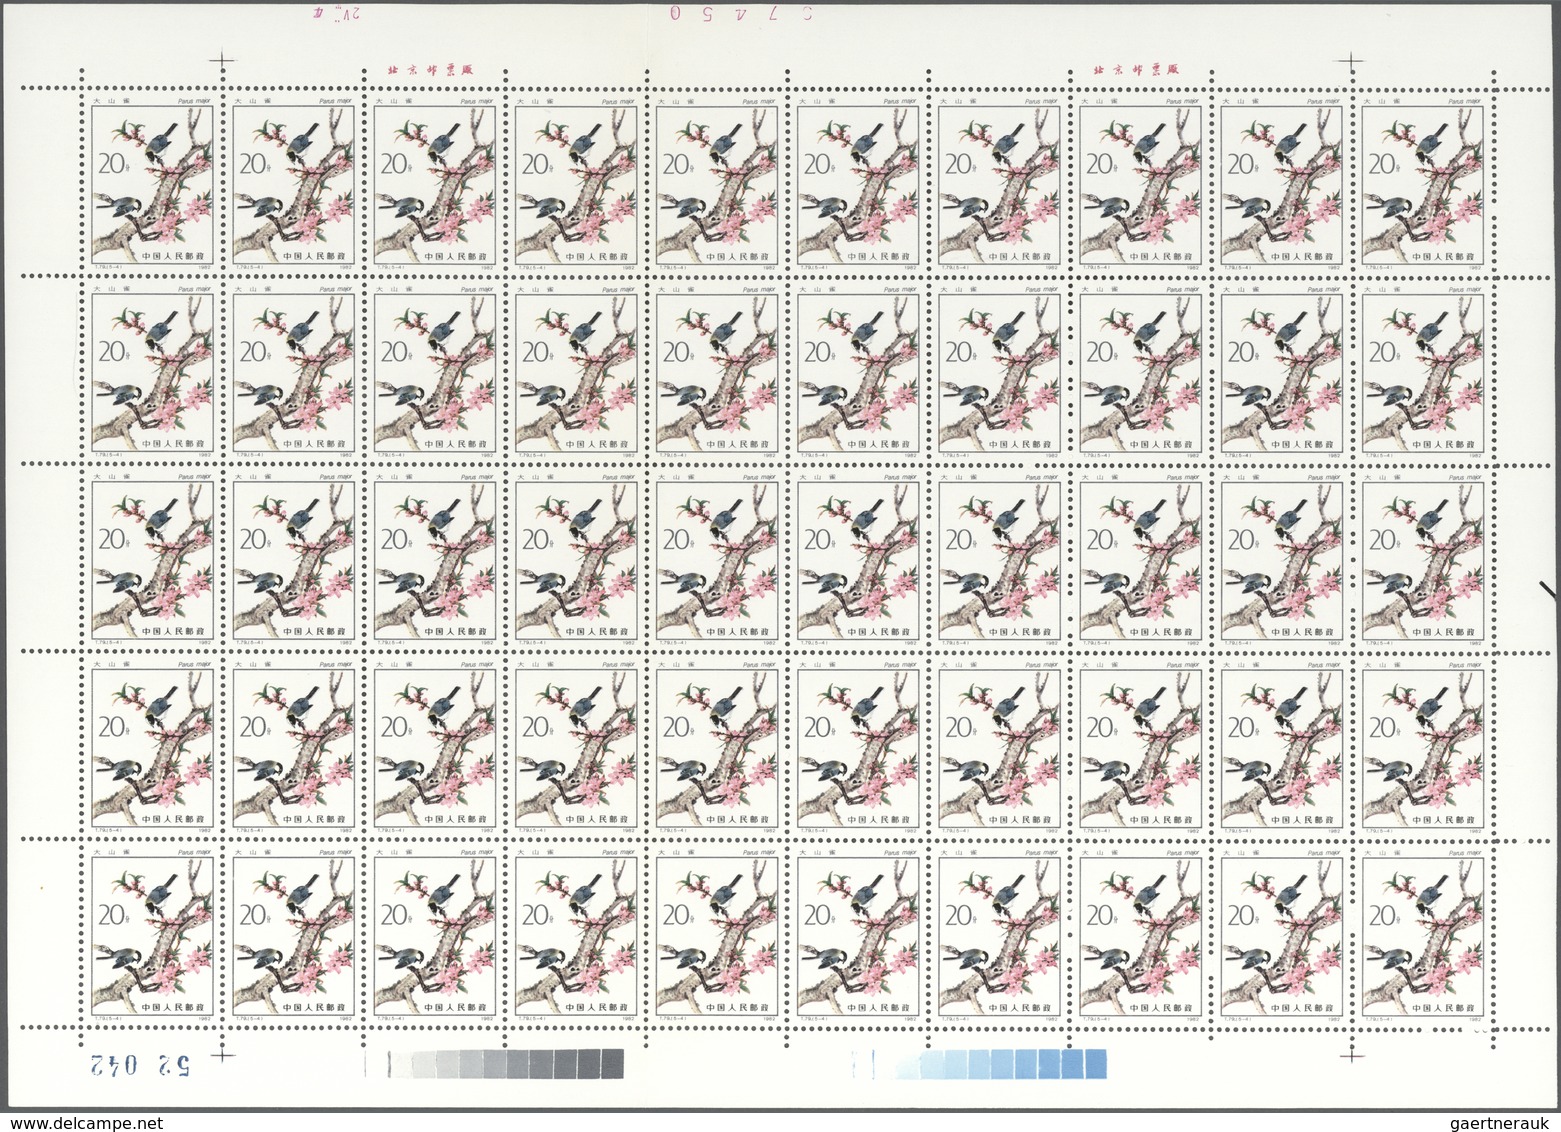 China - Volksrepublik: 1982, Minerals (T73), 50 complete sets of 4 on full sheets, and Birds (T79),